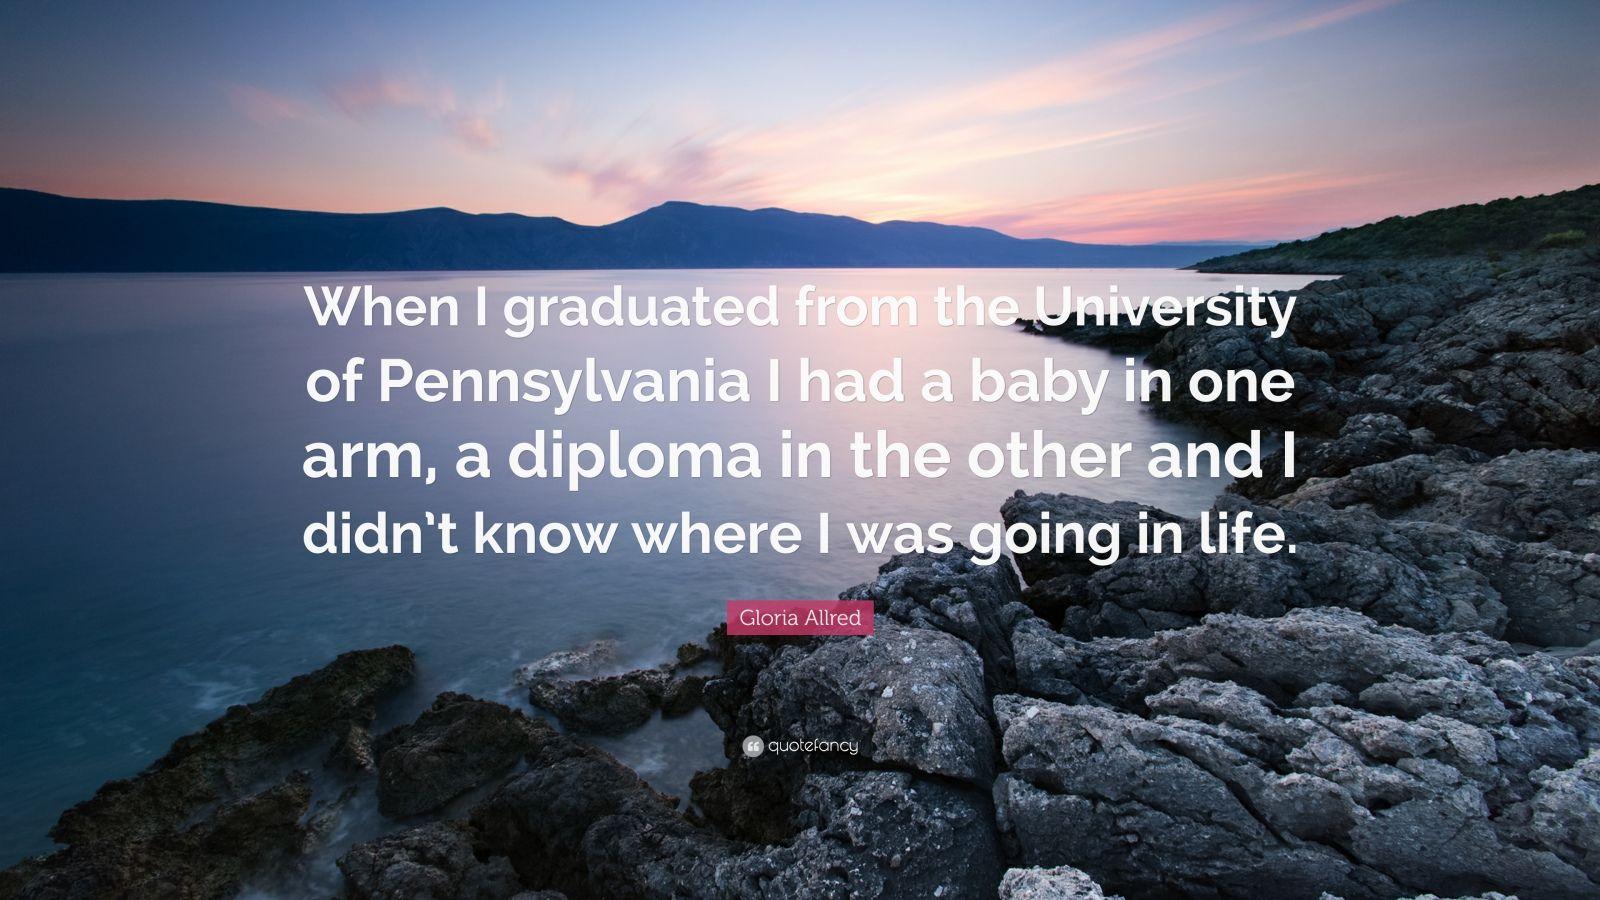 Gloria Allred Quote: “When I graduated from the University